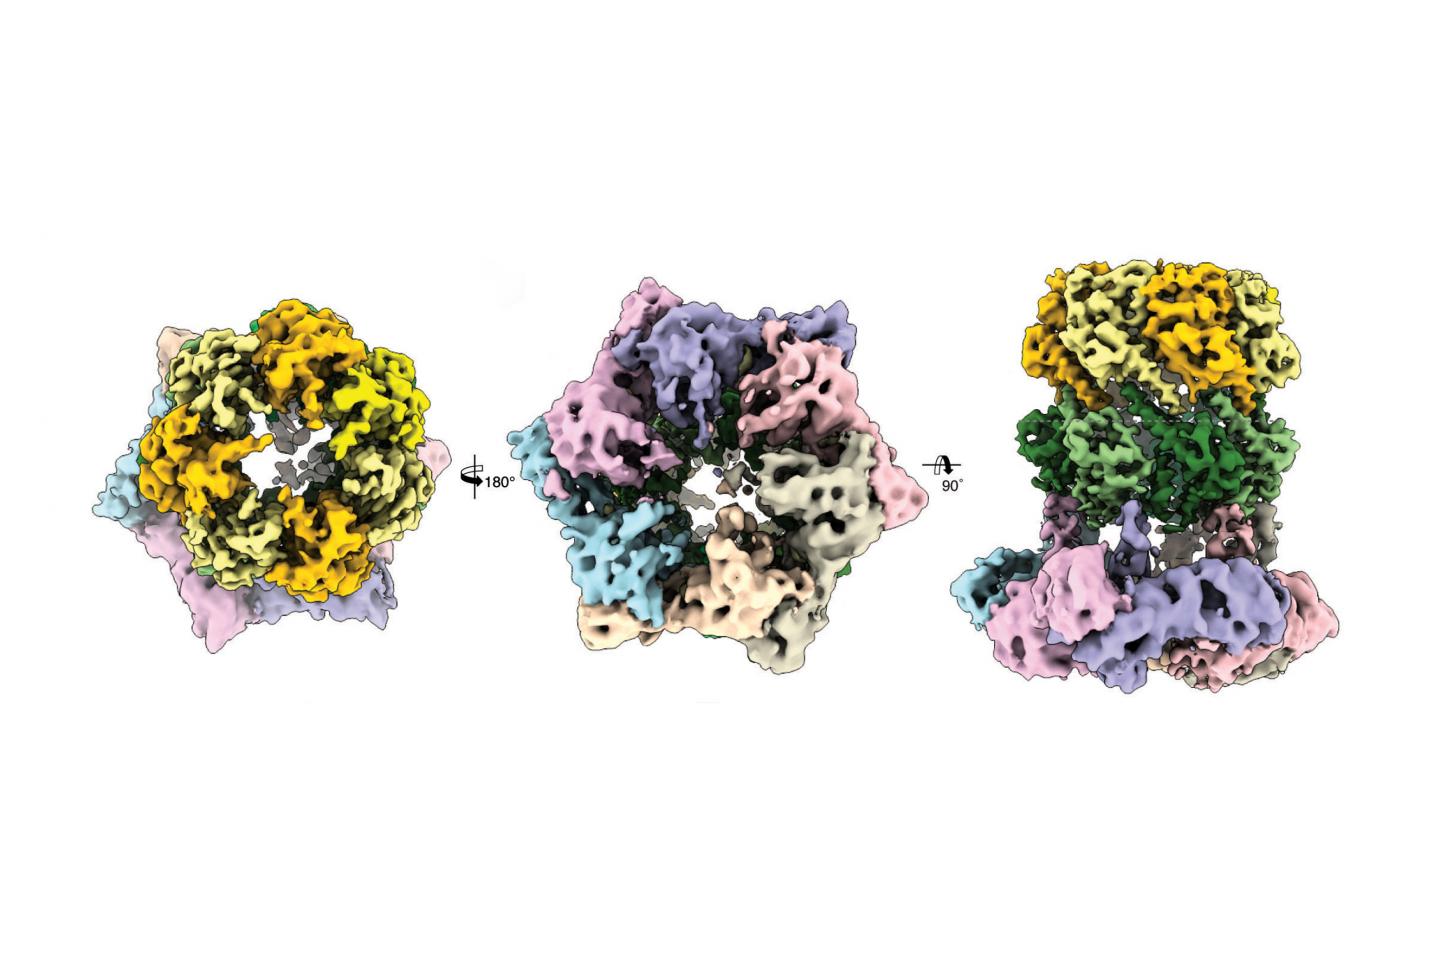 Cryo-electron microscopic Views of the Protein Complex ClpX-ClpP